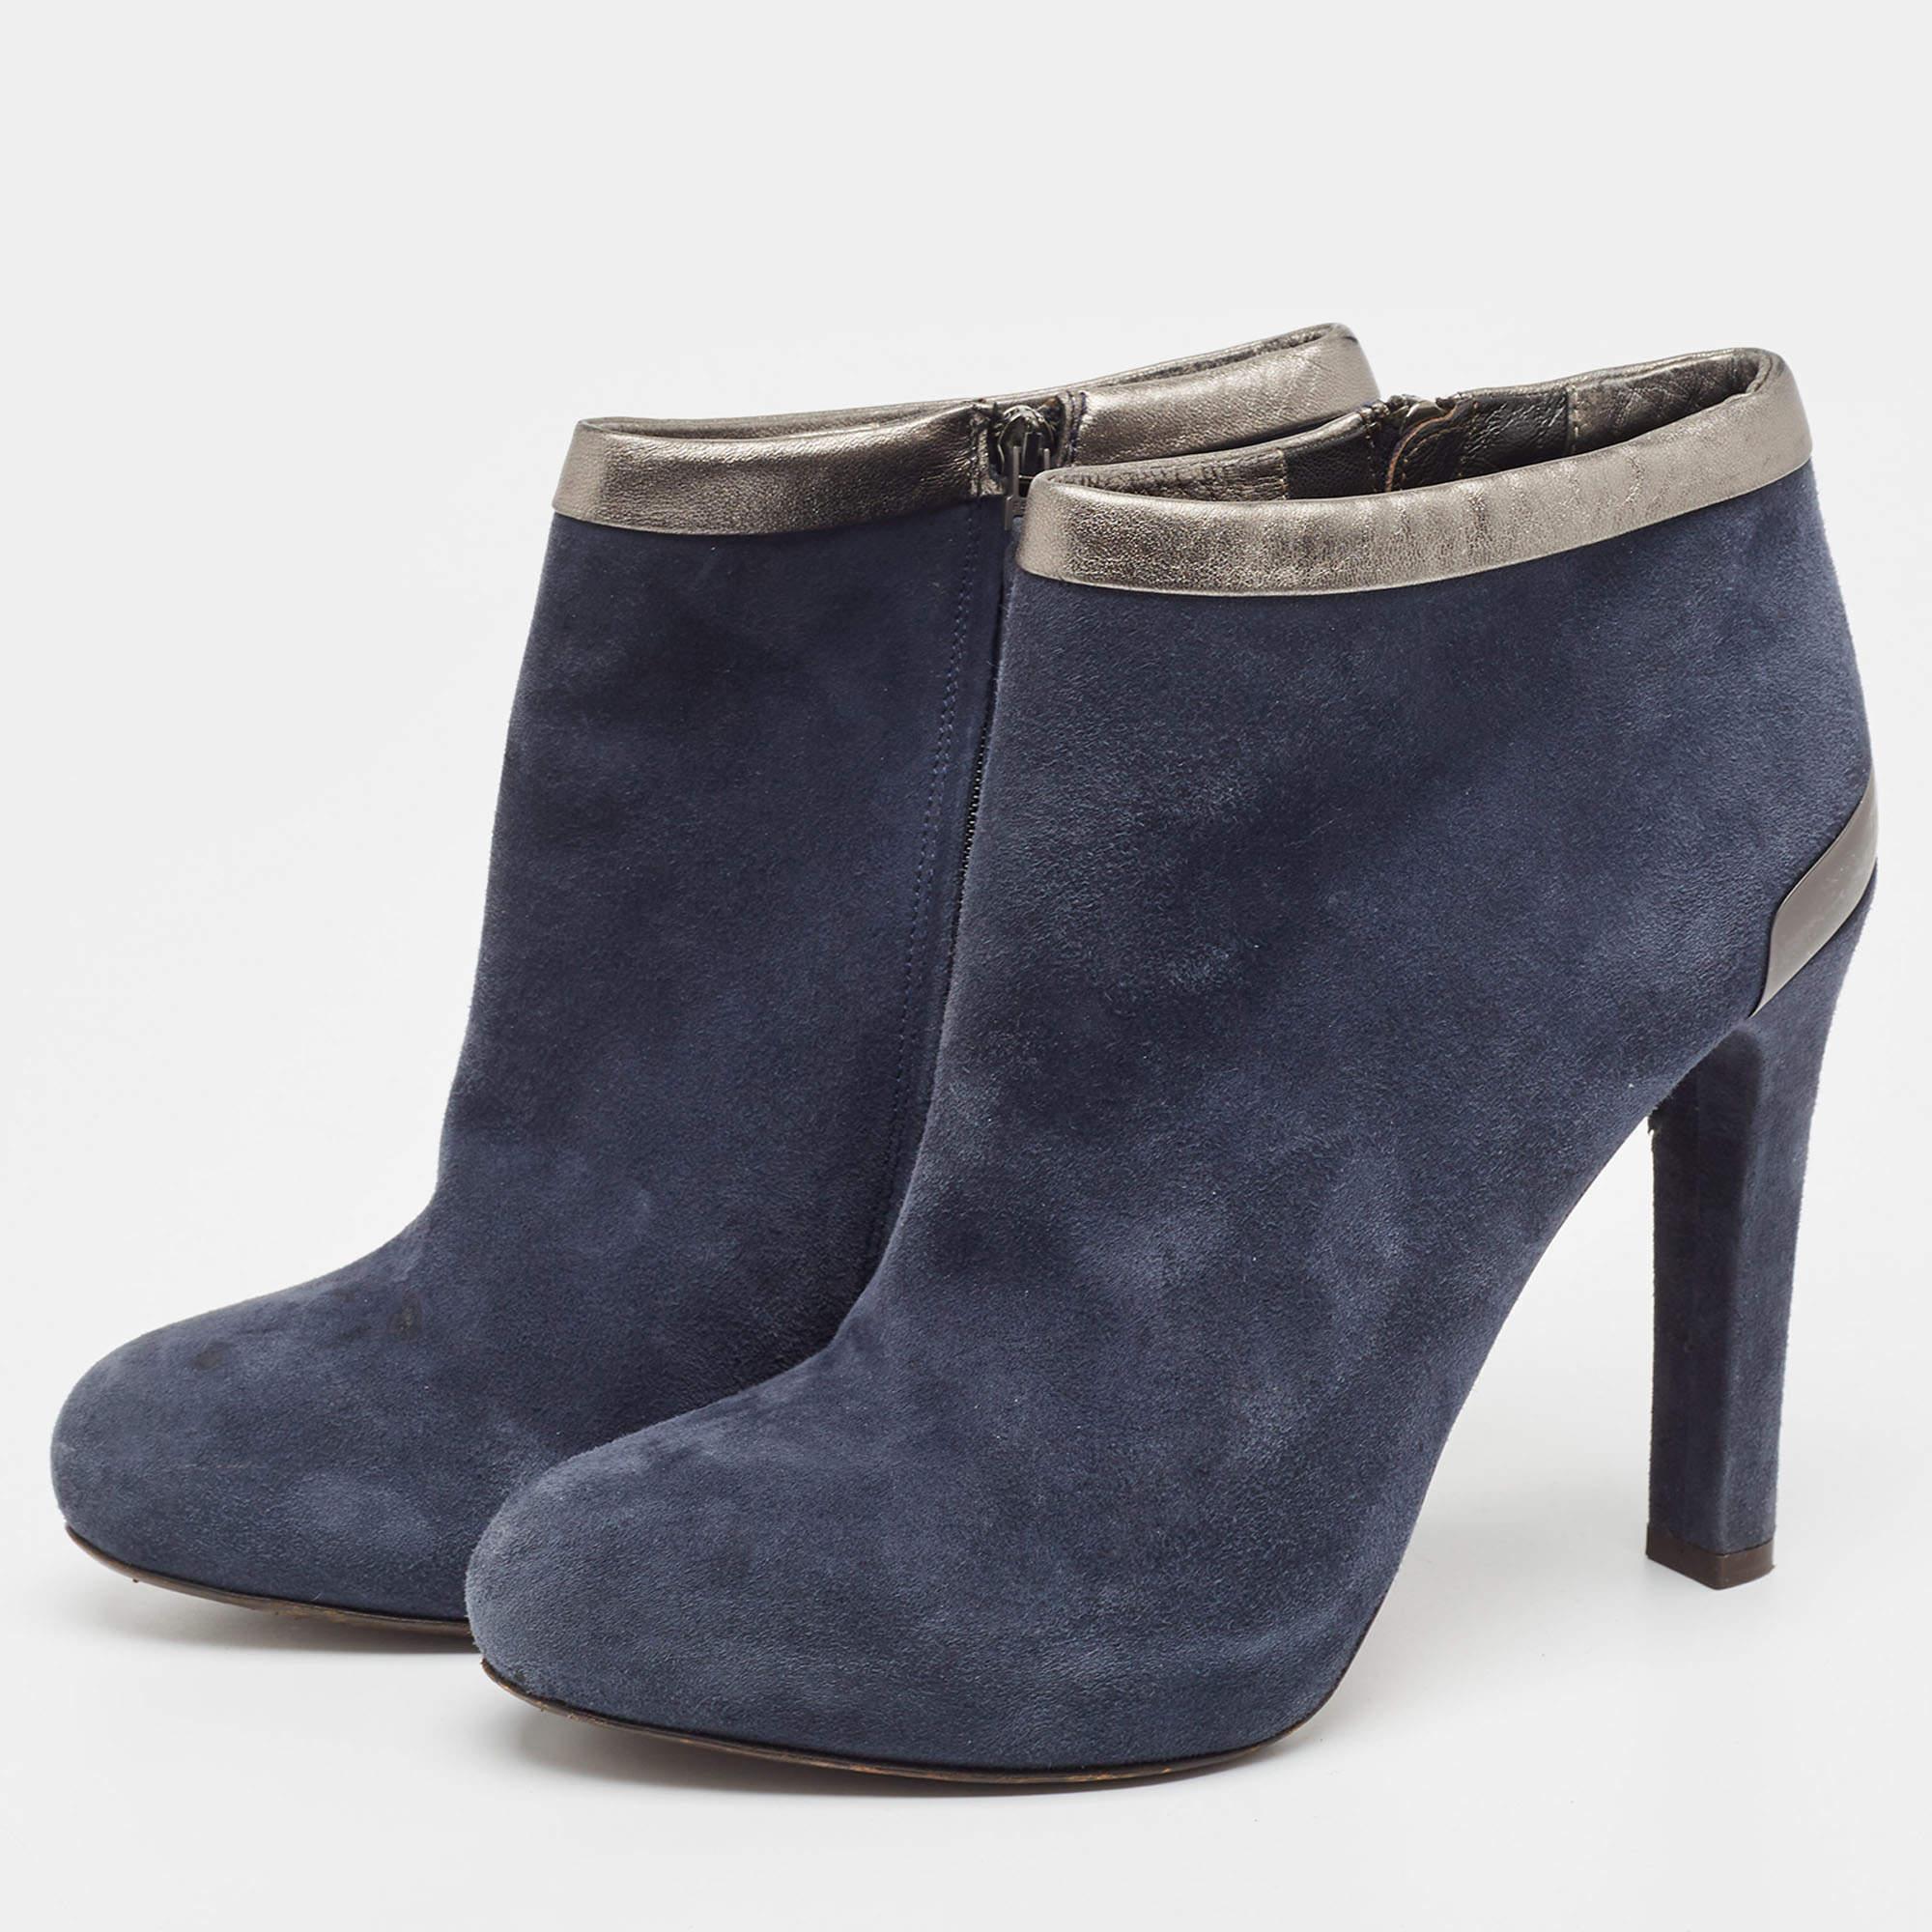 Fendi Navy Blue Suede Ankle Booties Size 39.5 For Sale 4